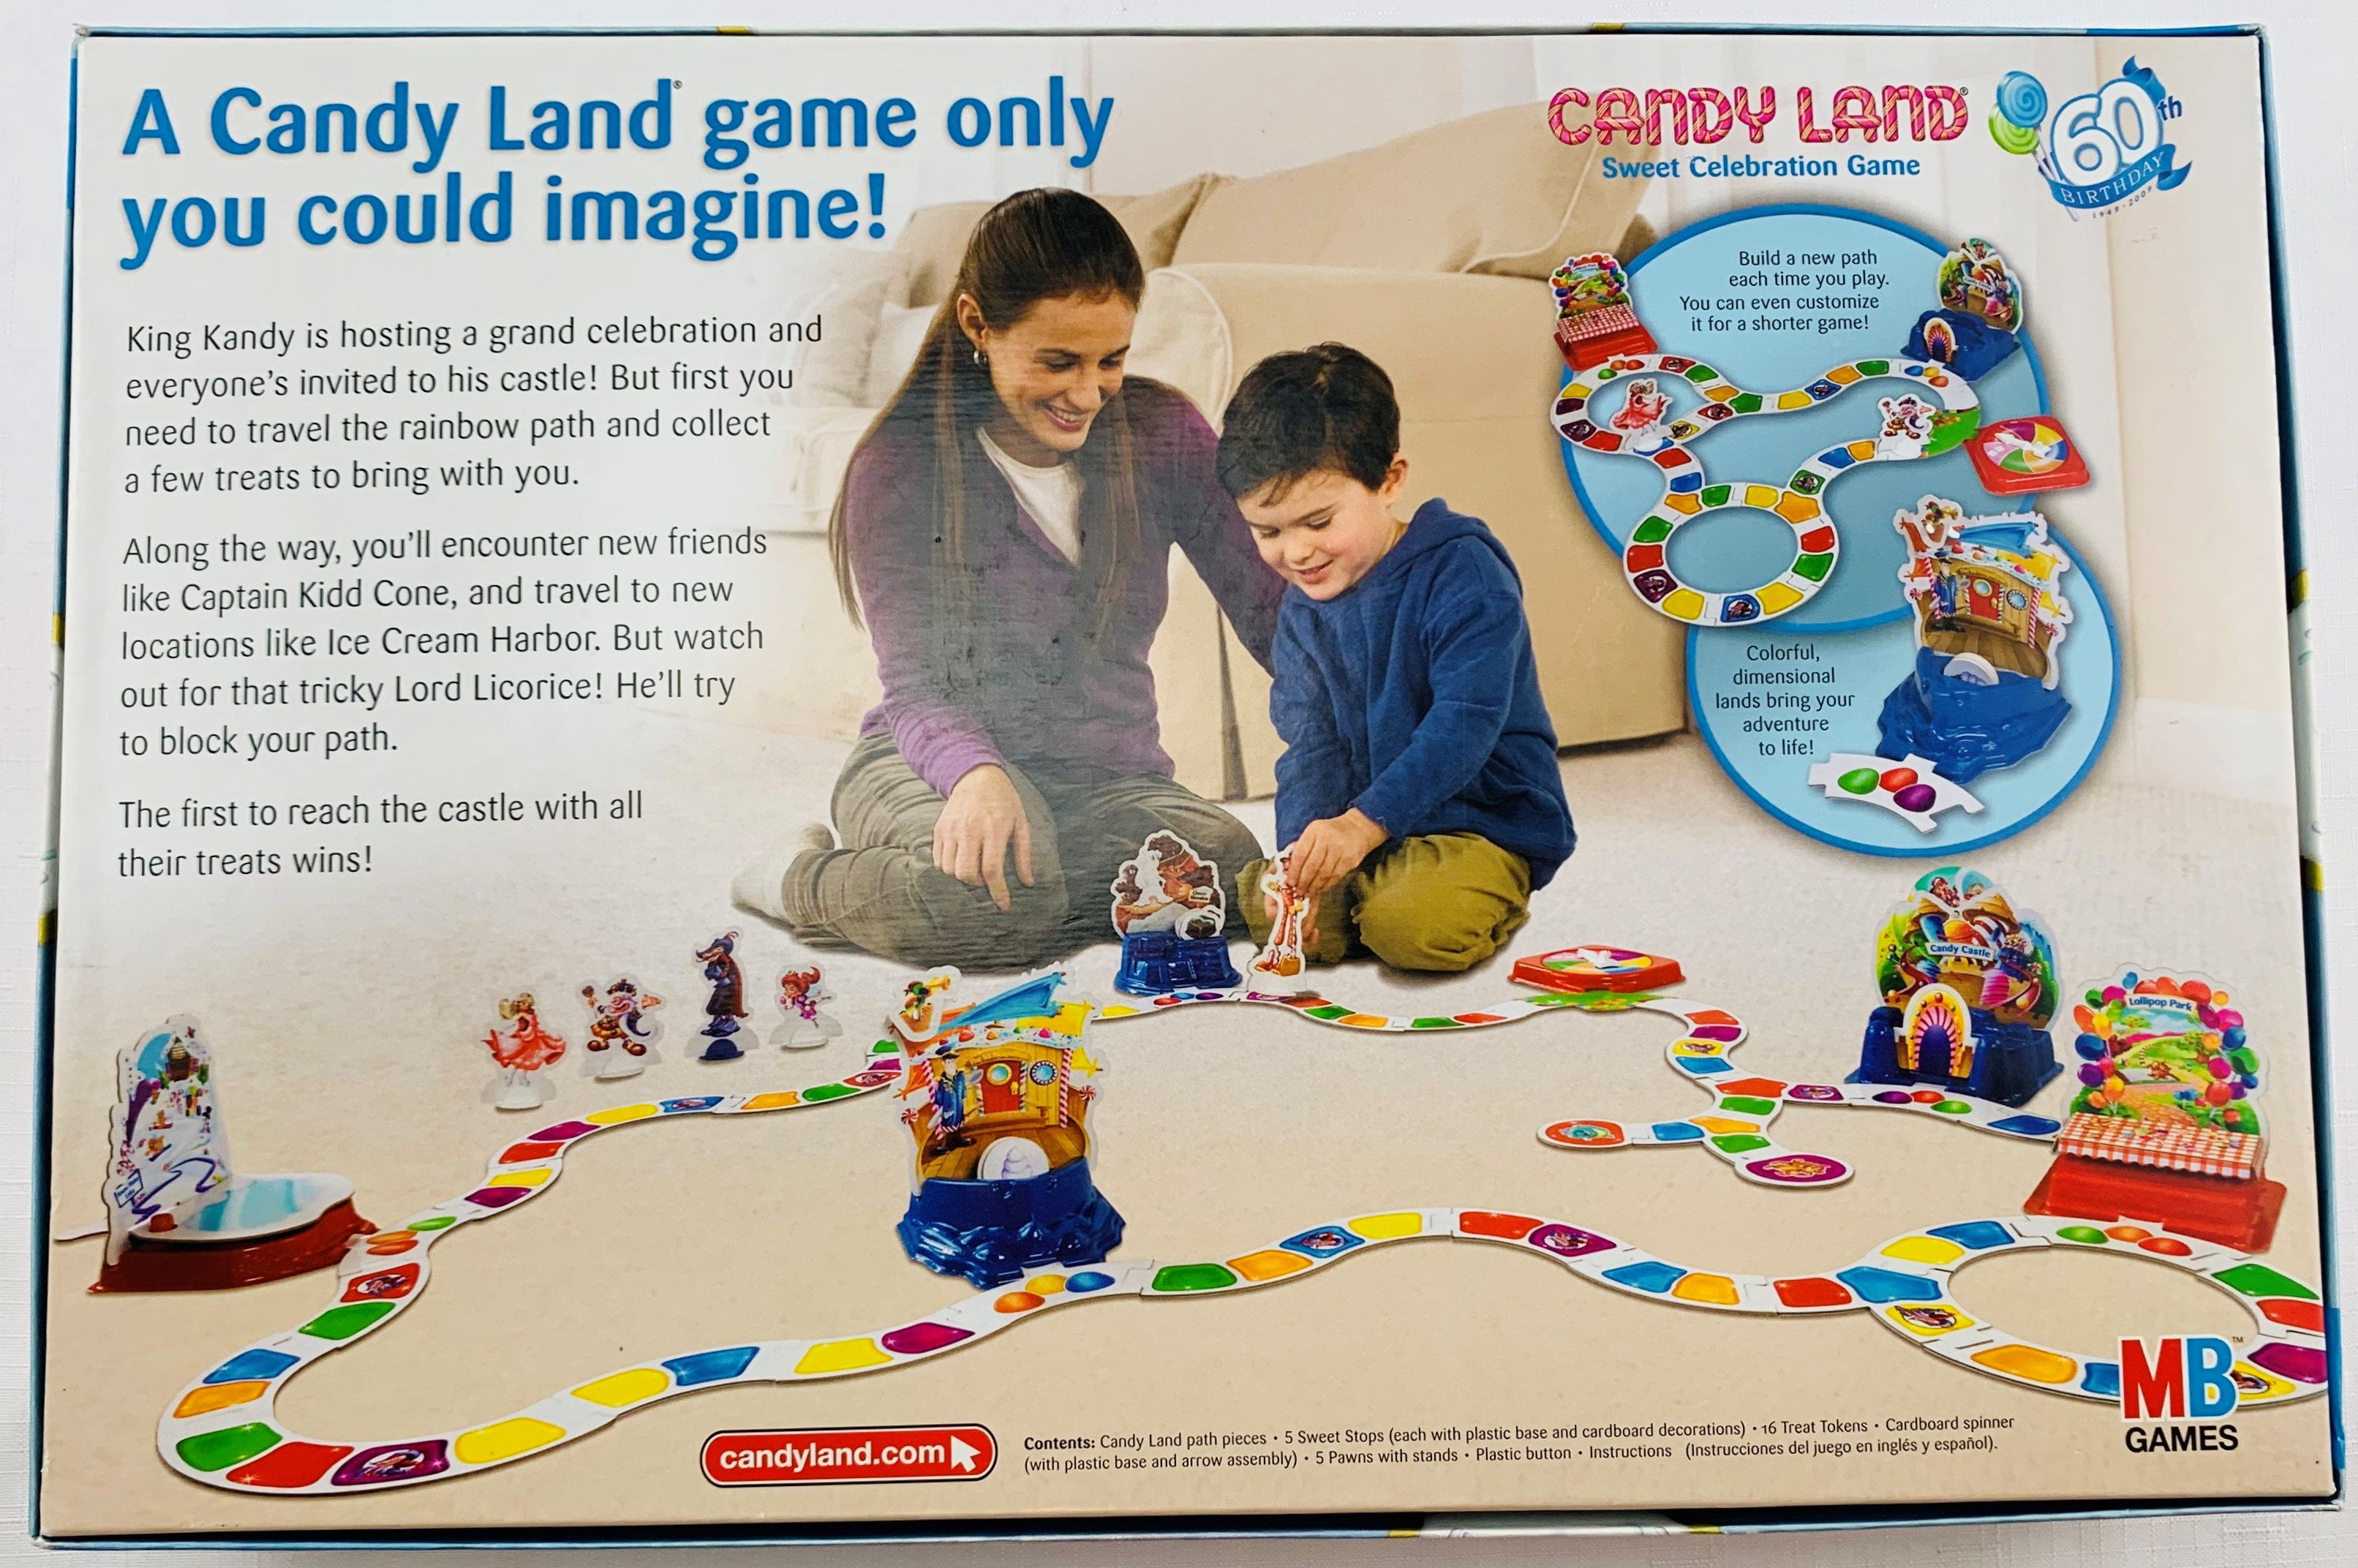 candyland board game layout